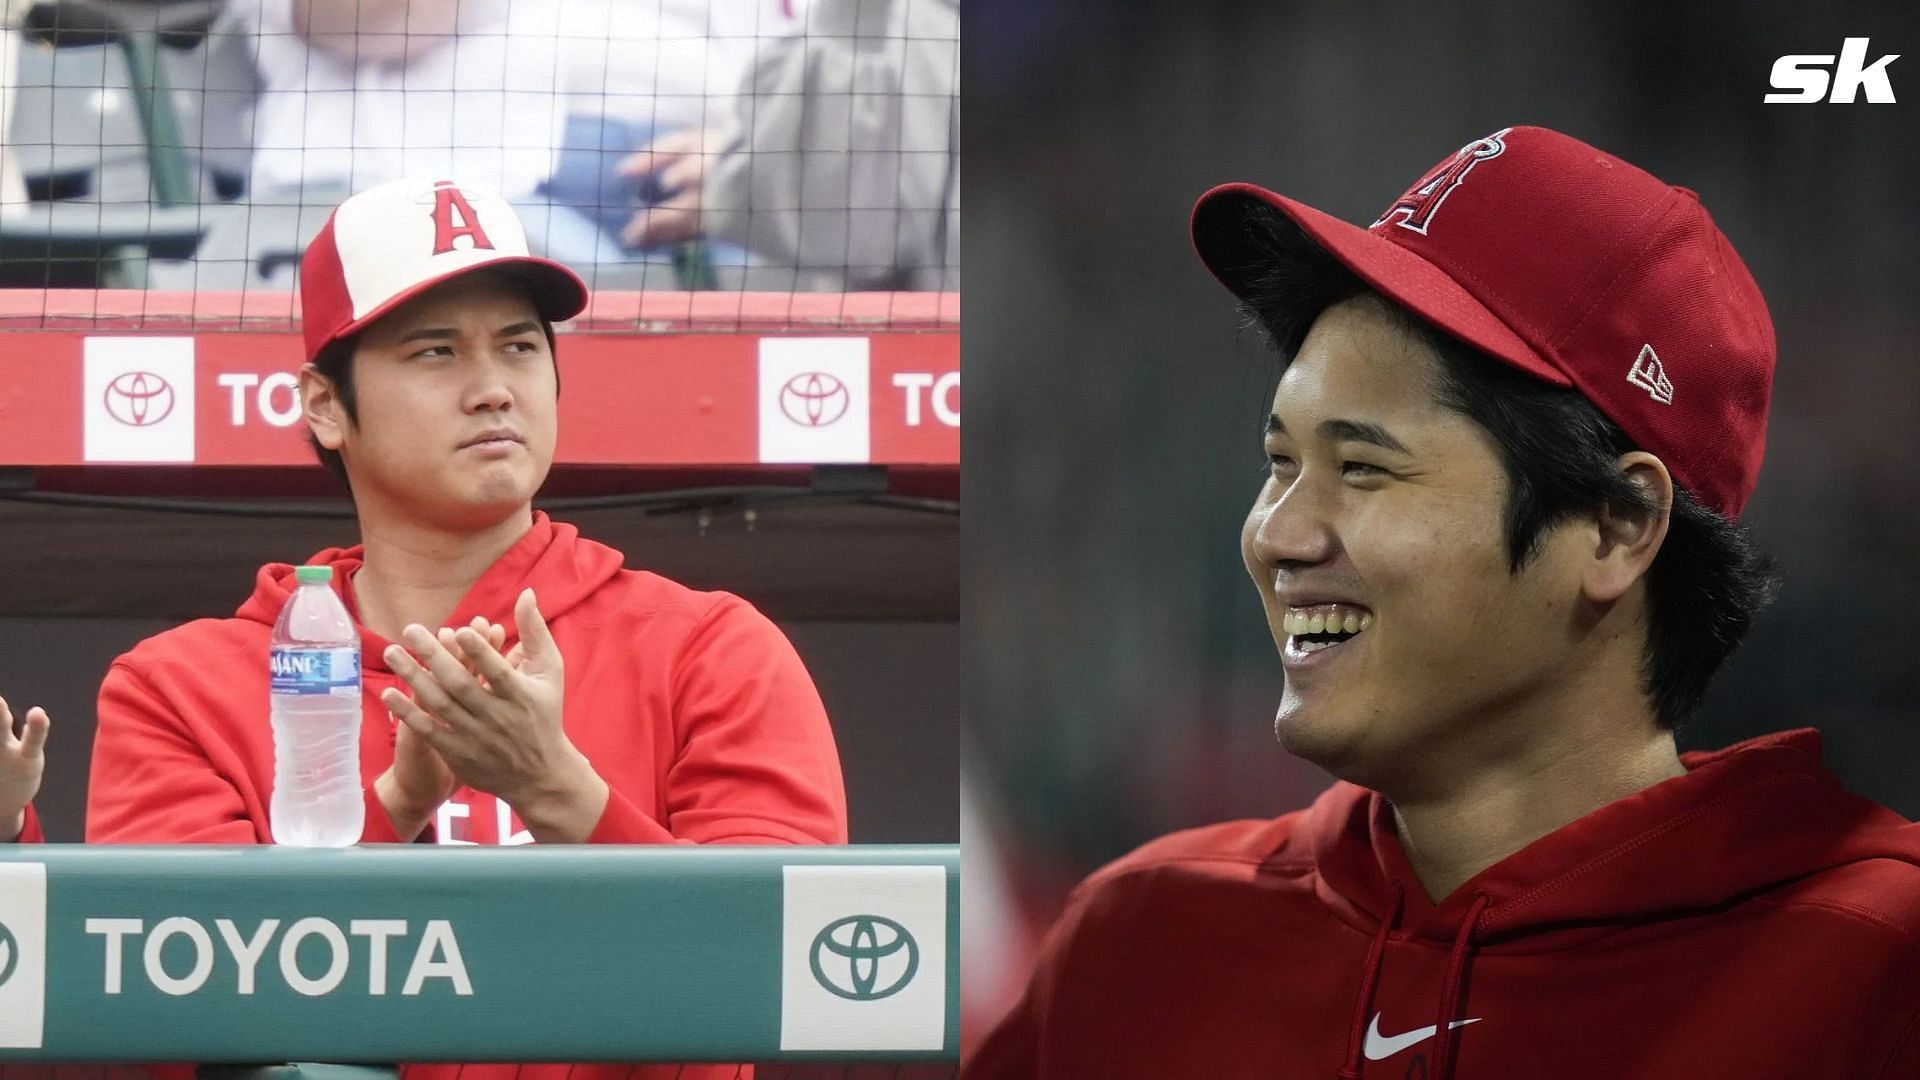 Angels Land Phenom Shohei Ohtani, the Biggest Prize of the Offseason